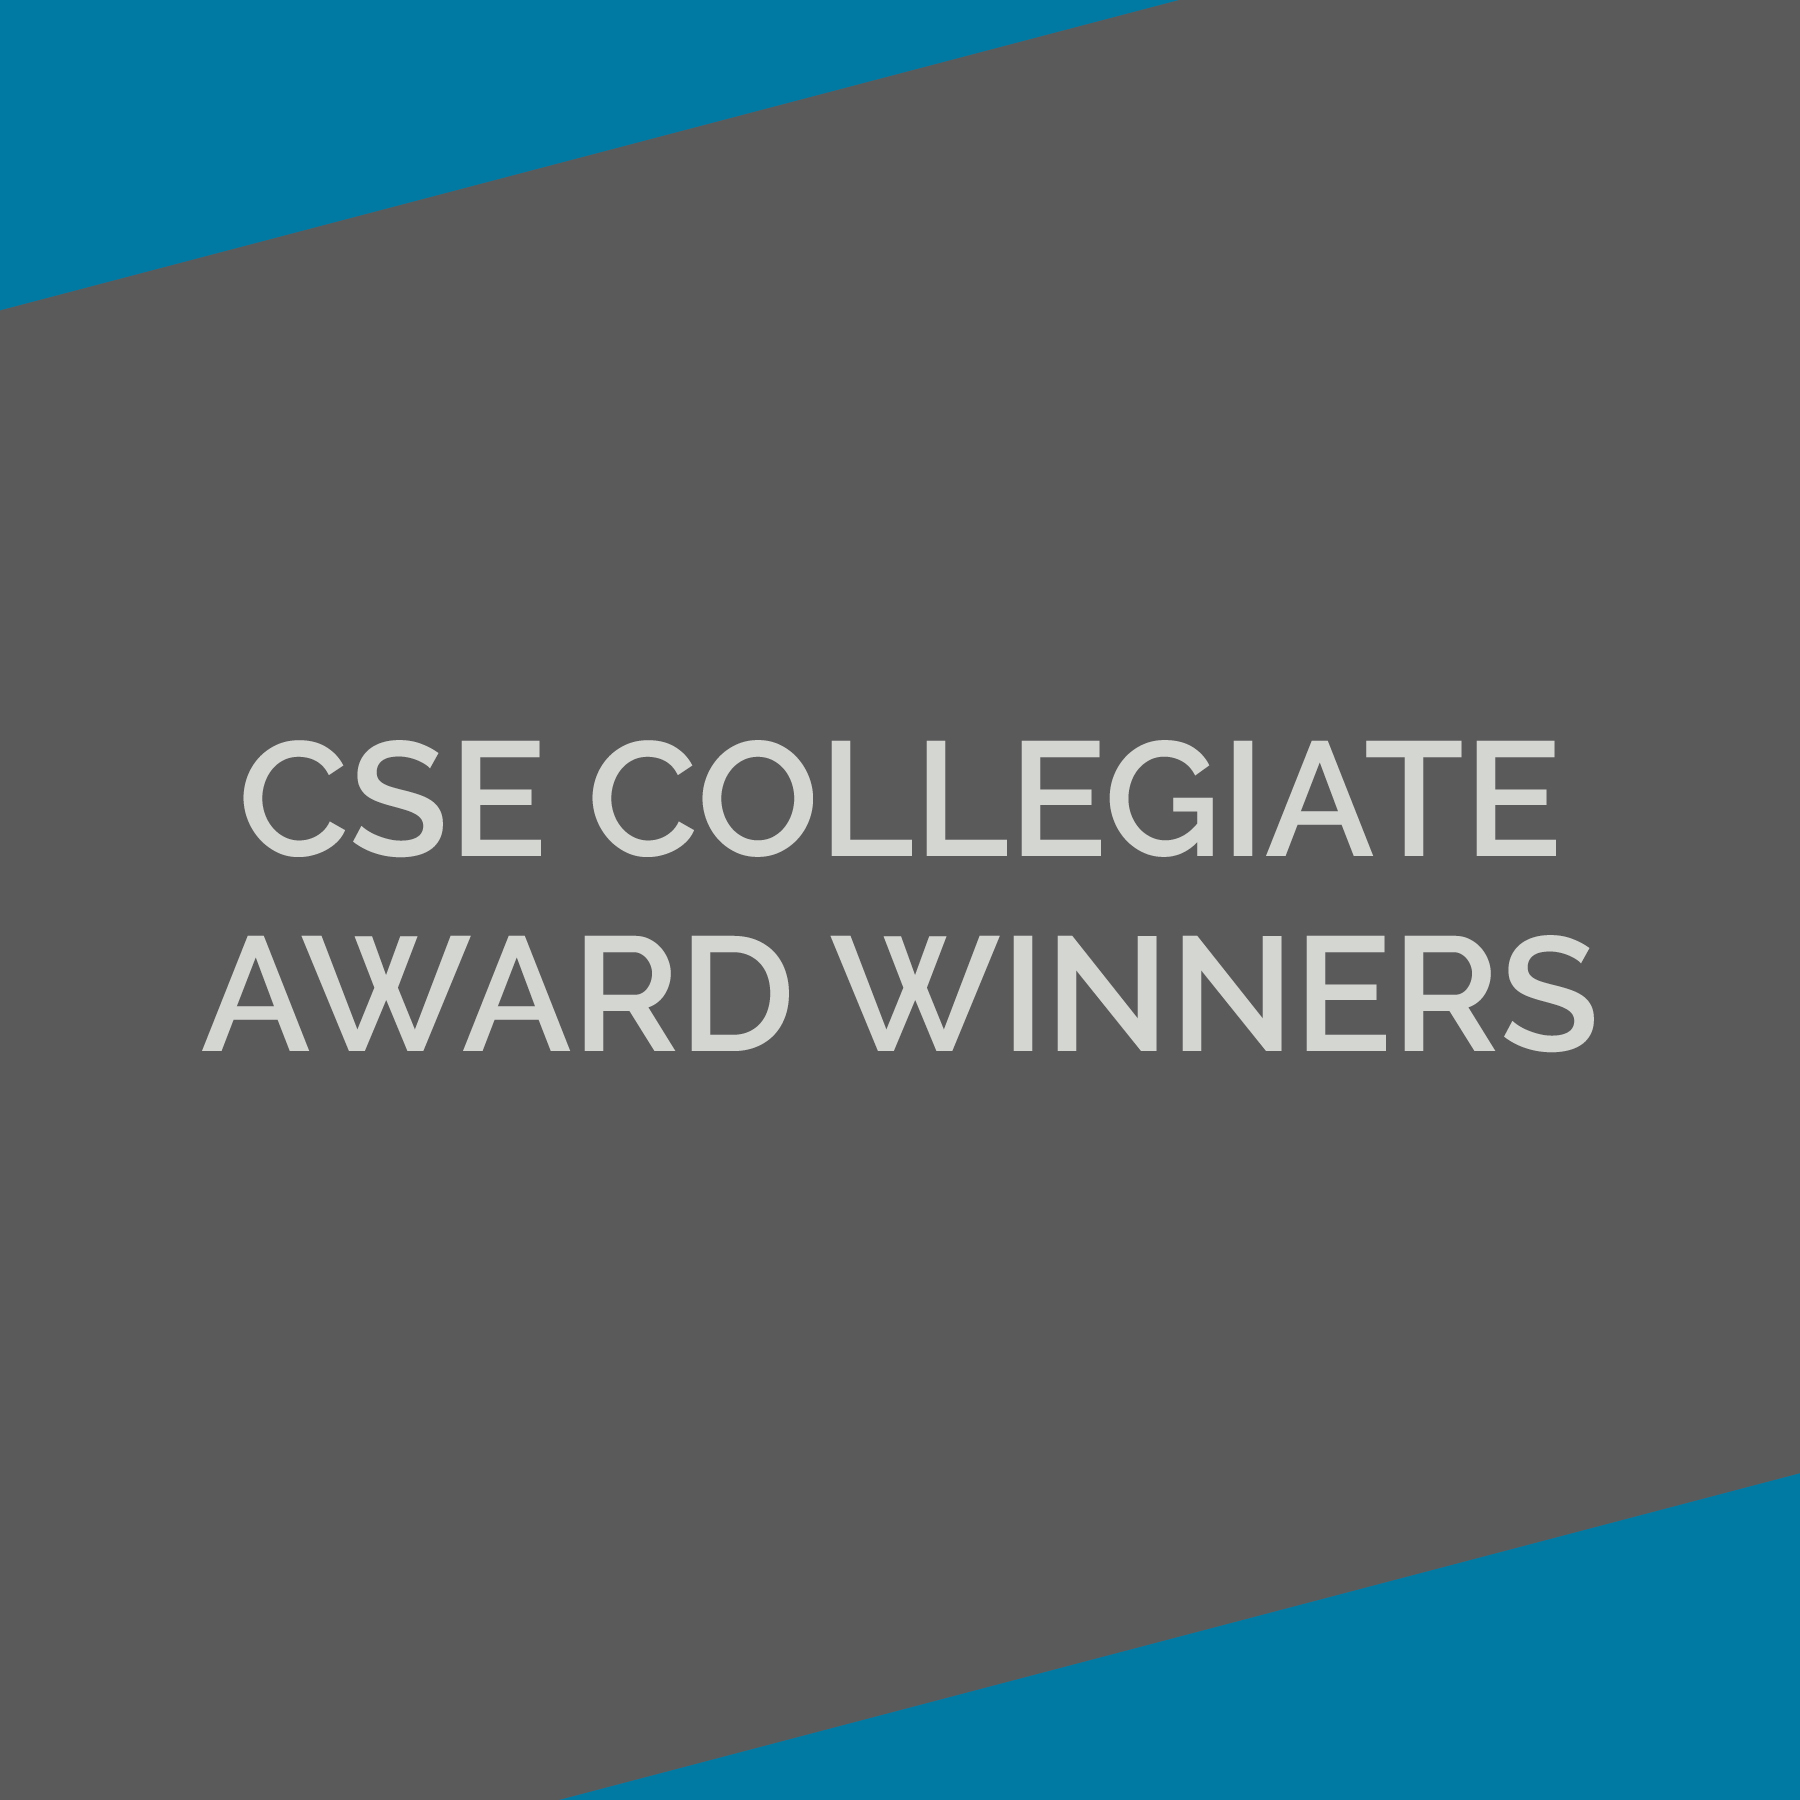 dark gray graphic with blue accents in corners that says CSE collegiate award winners